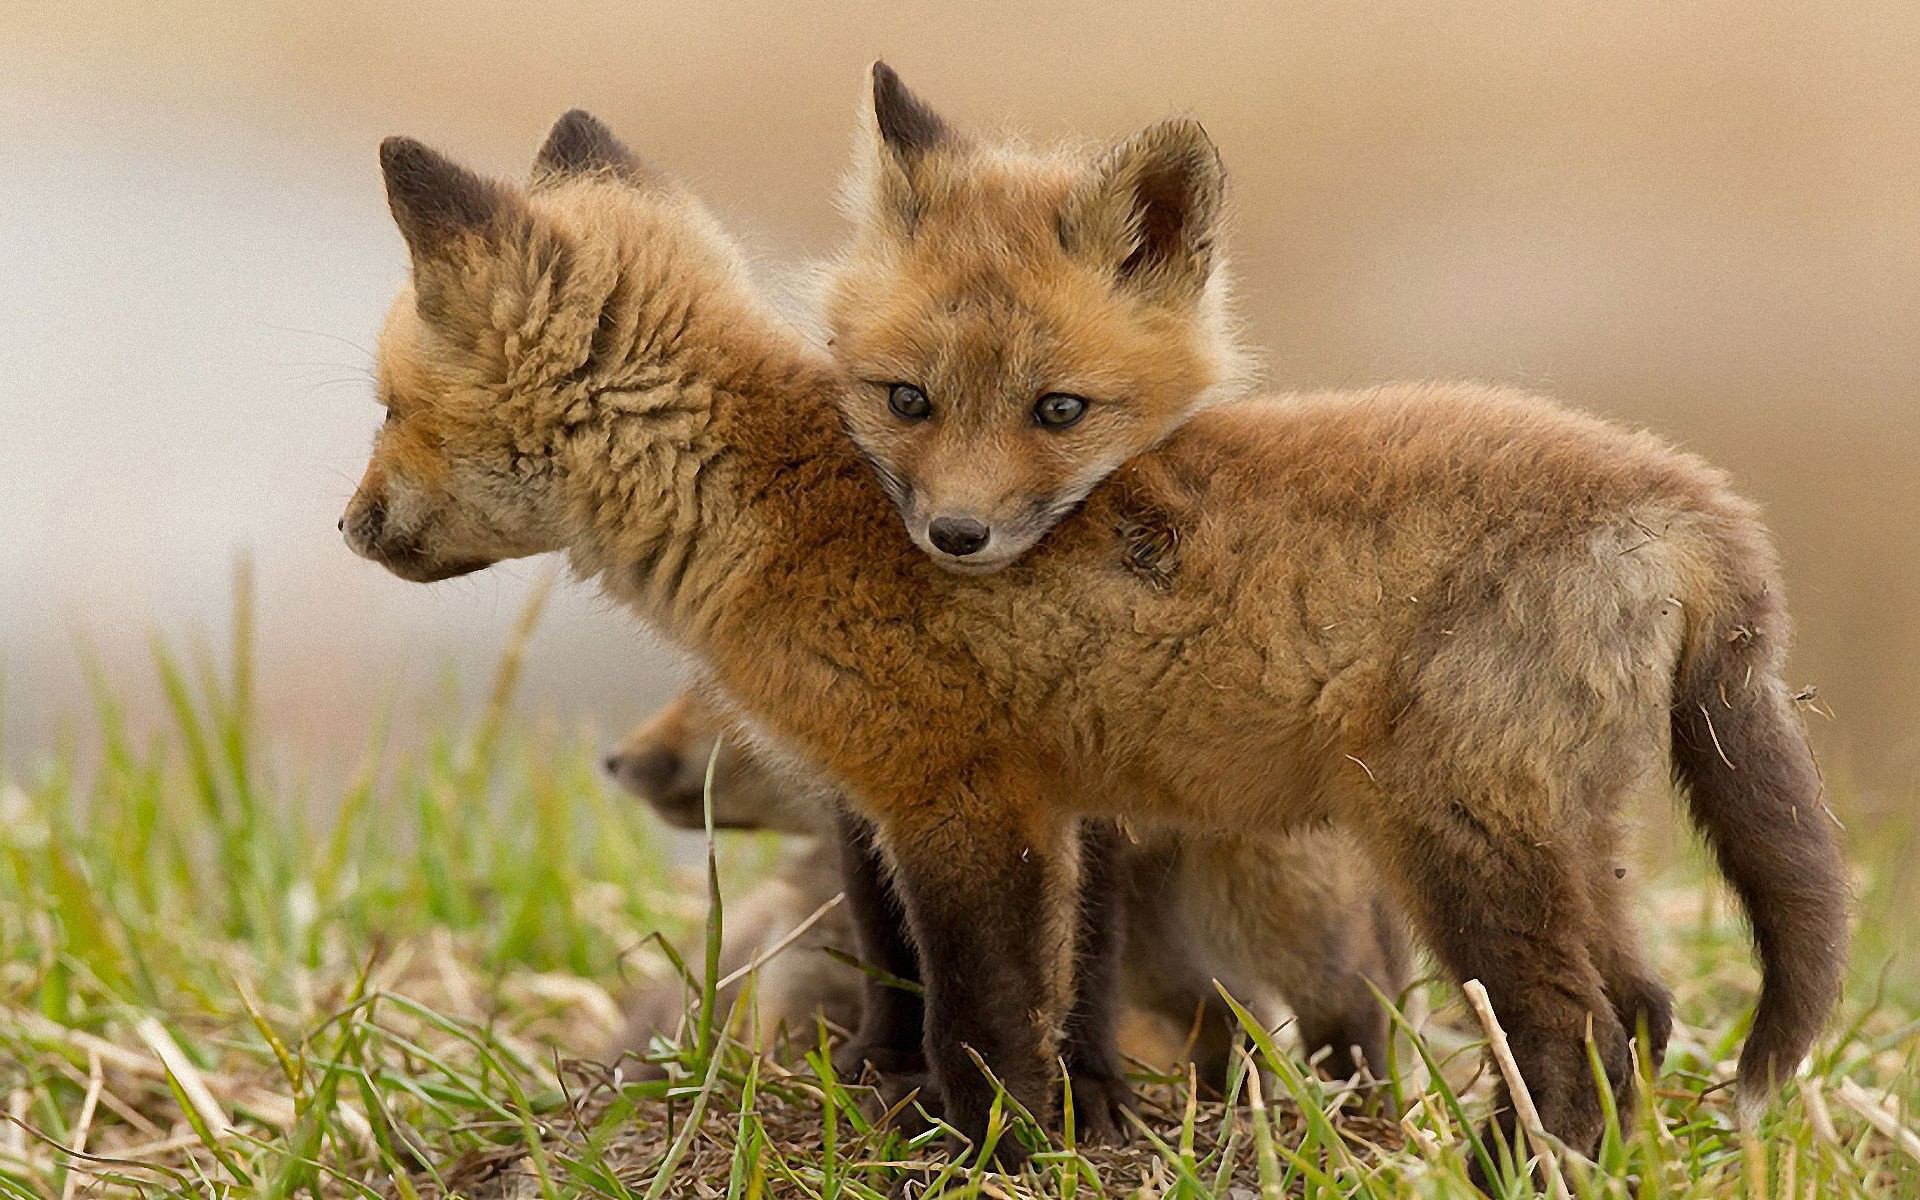 These are foxes